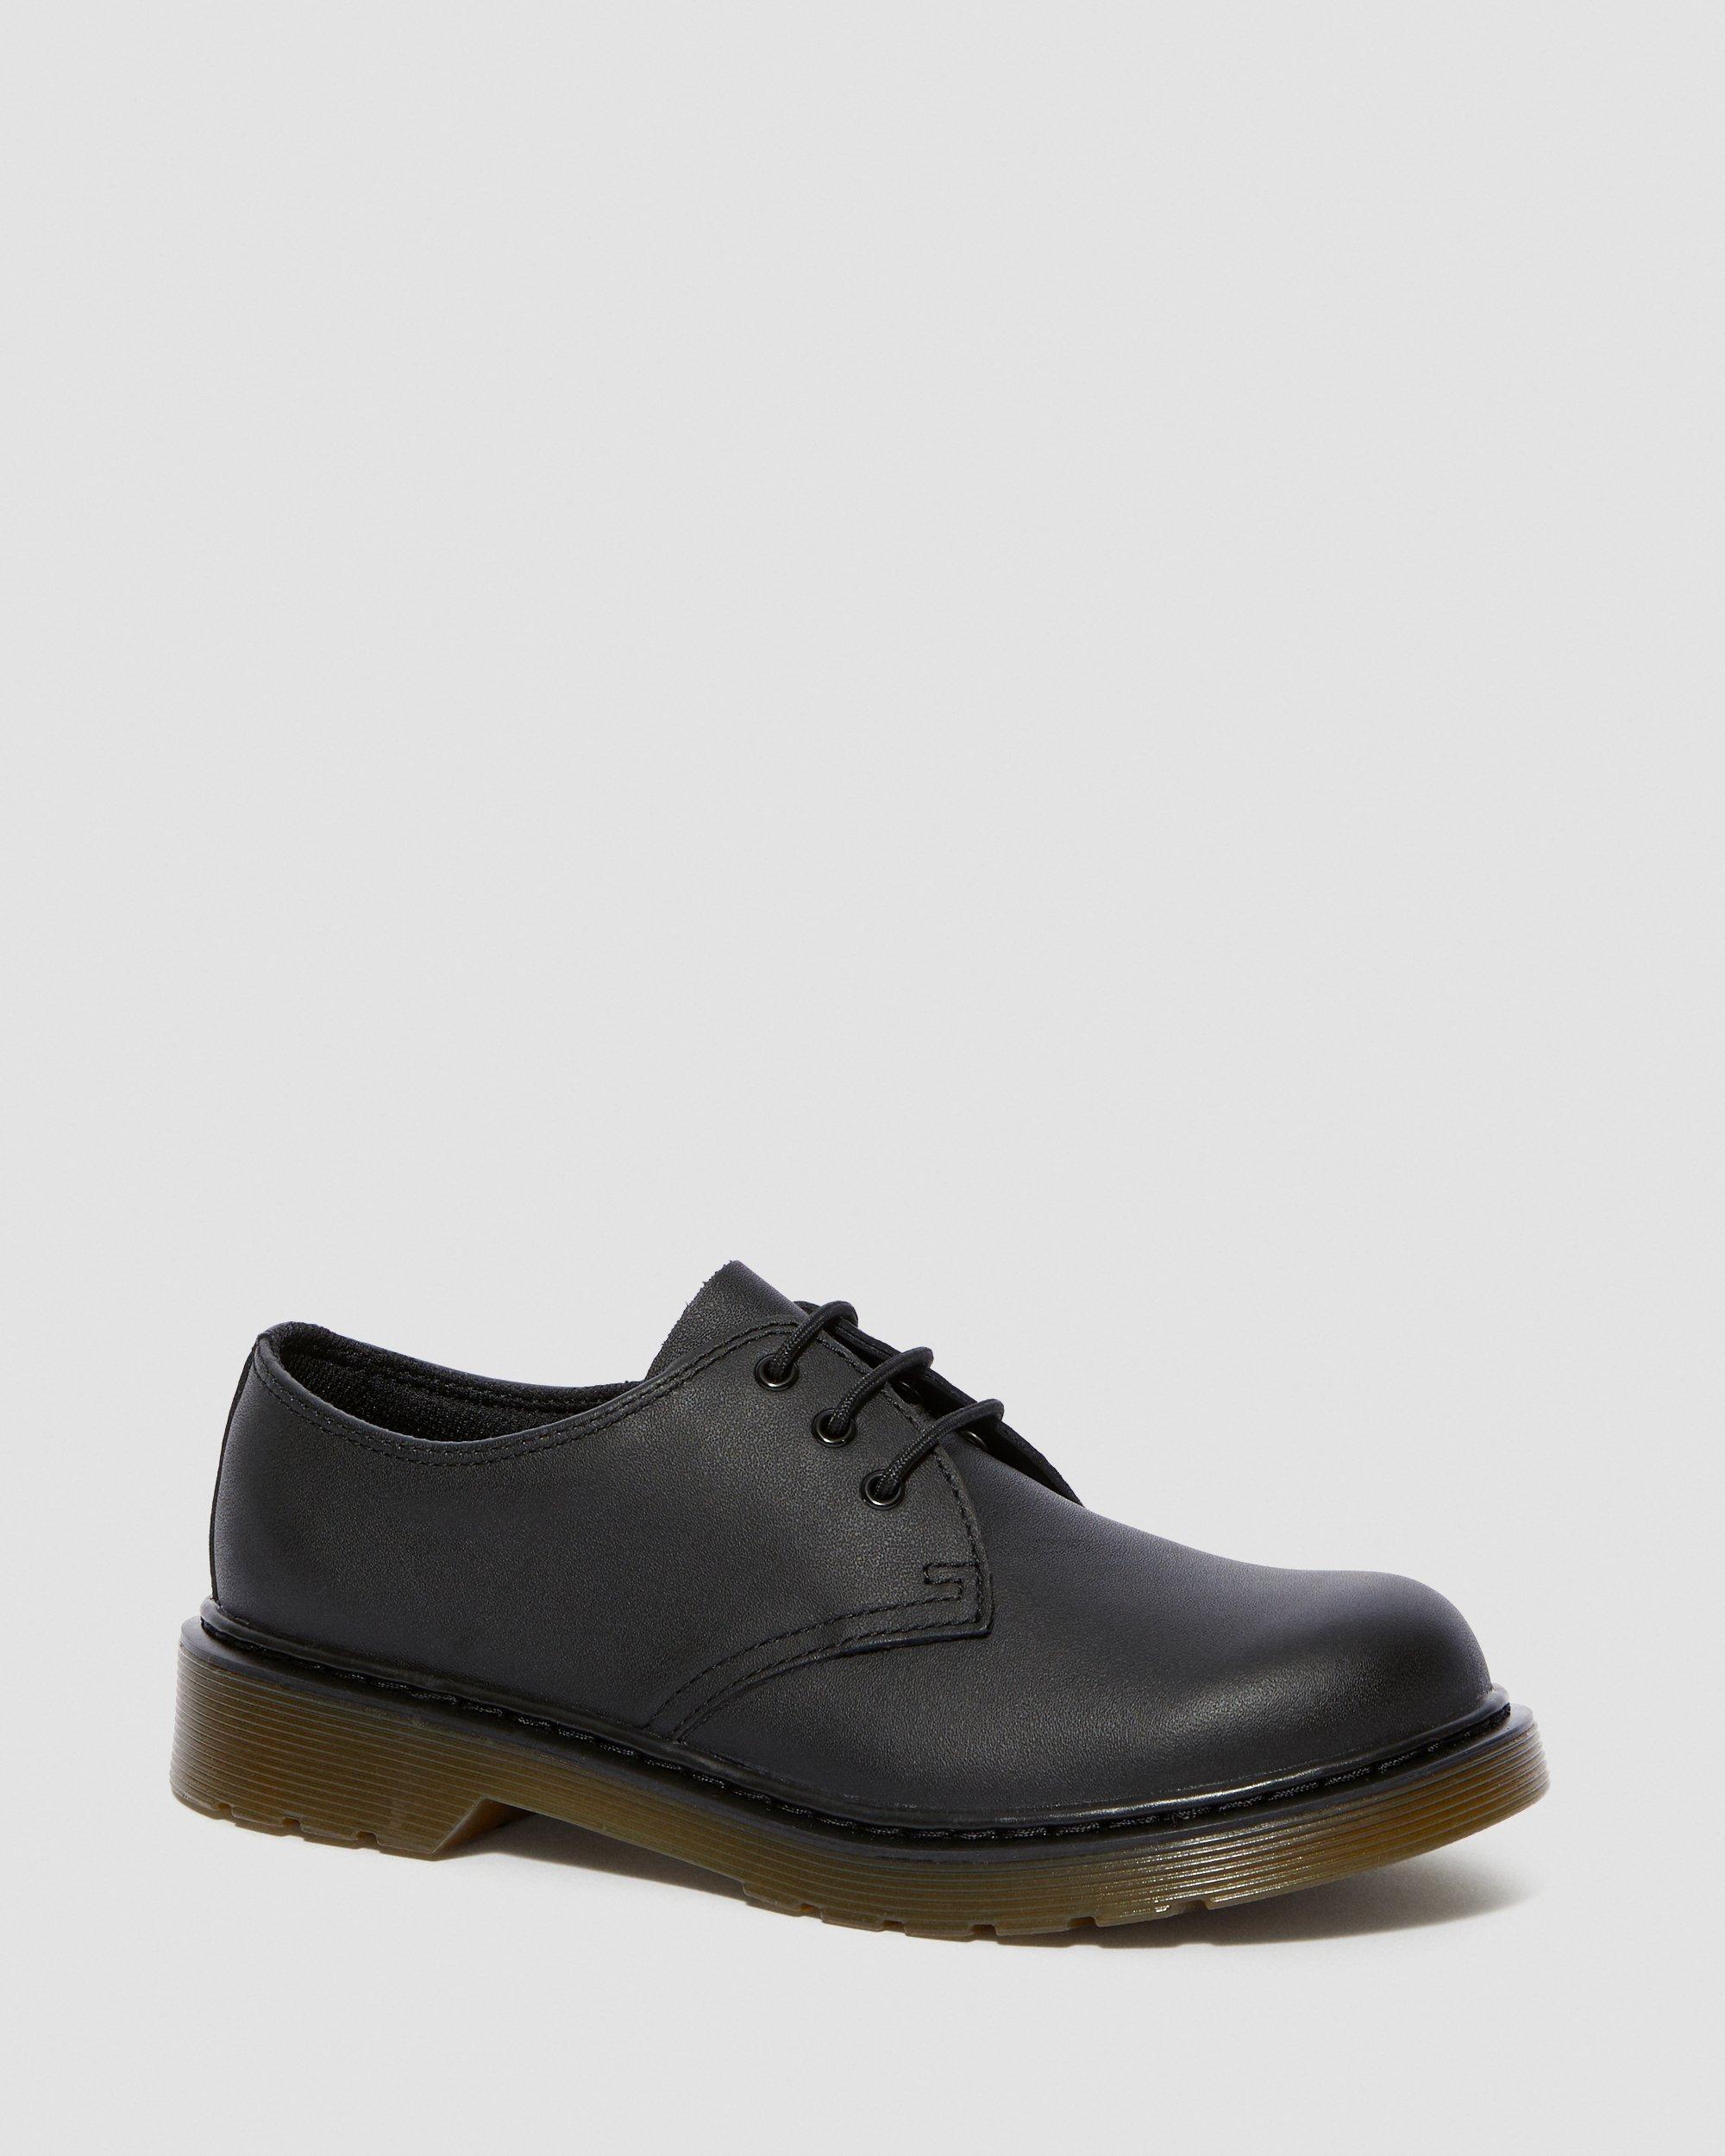 1461 YOUTH LEATHER SHOES | Dr. Martens